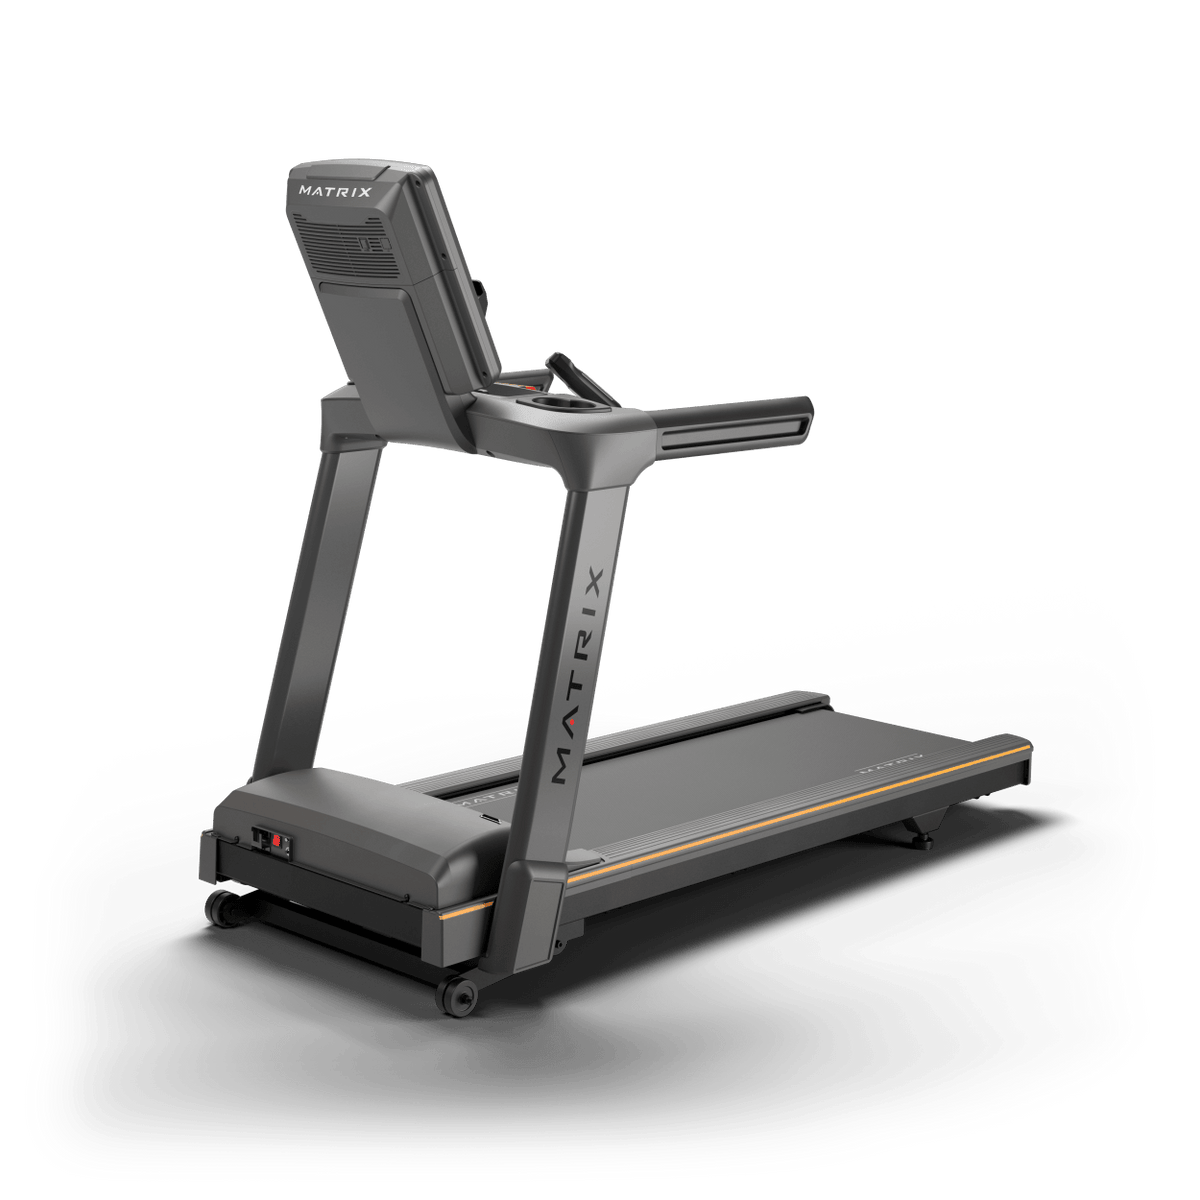 Matrix Fitness Lifetstyle Treadmill with Premium LED Console rear view | Fitness Experience